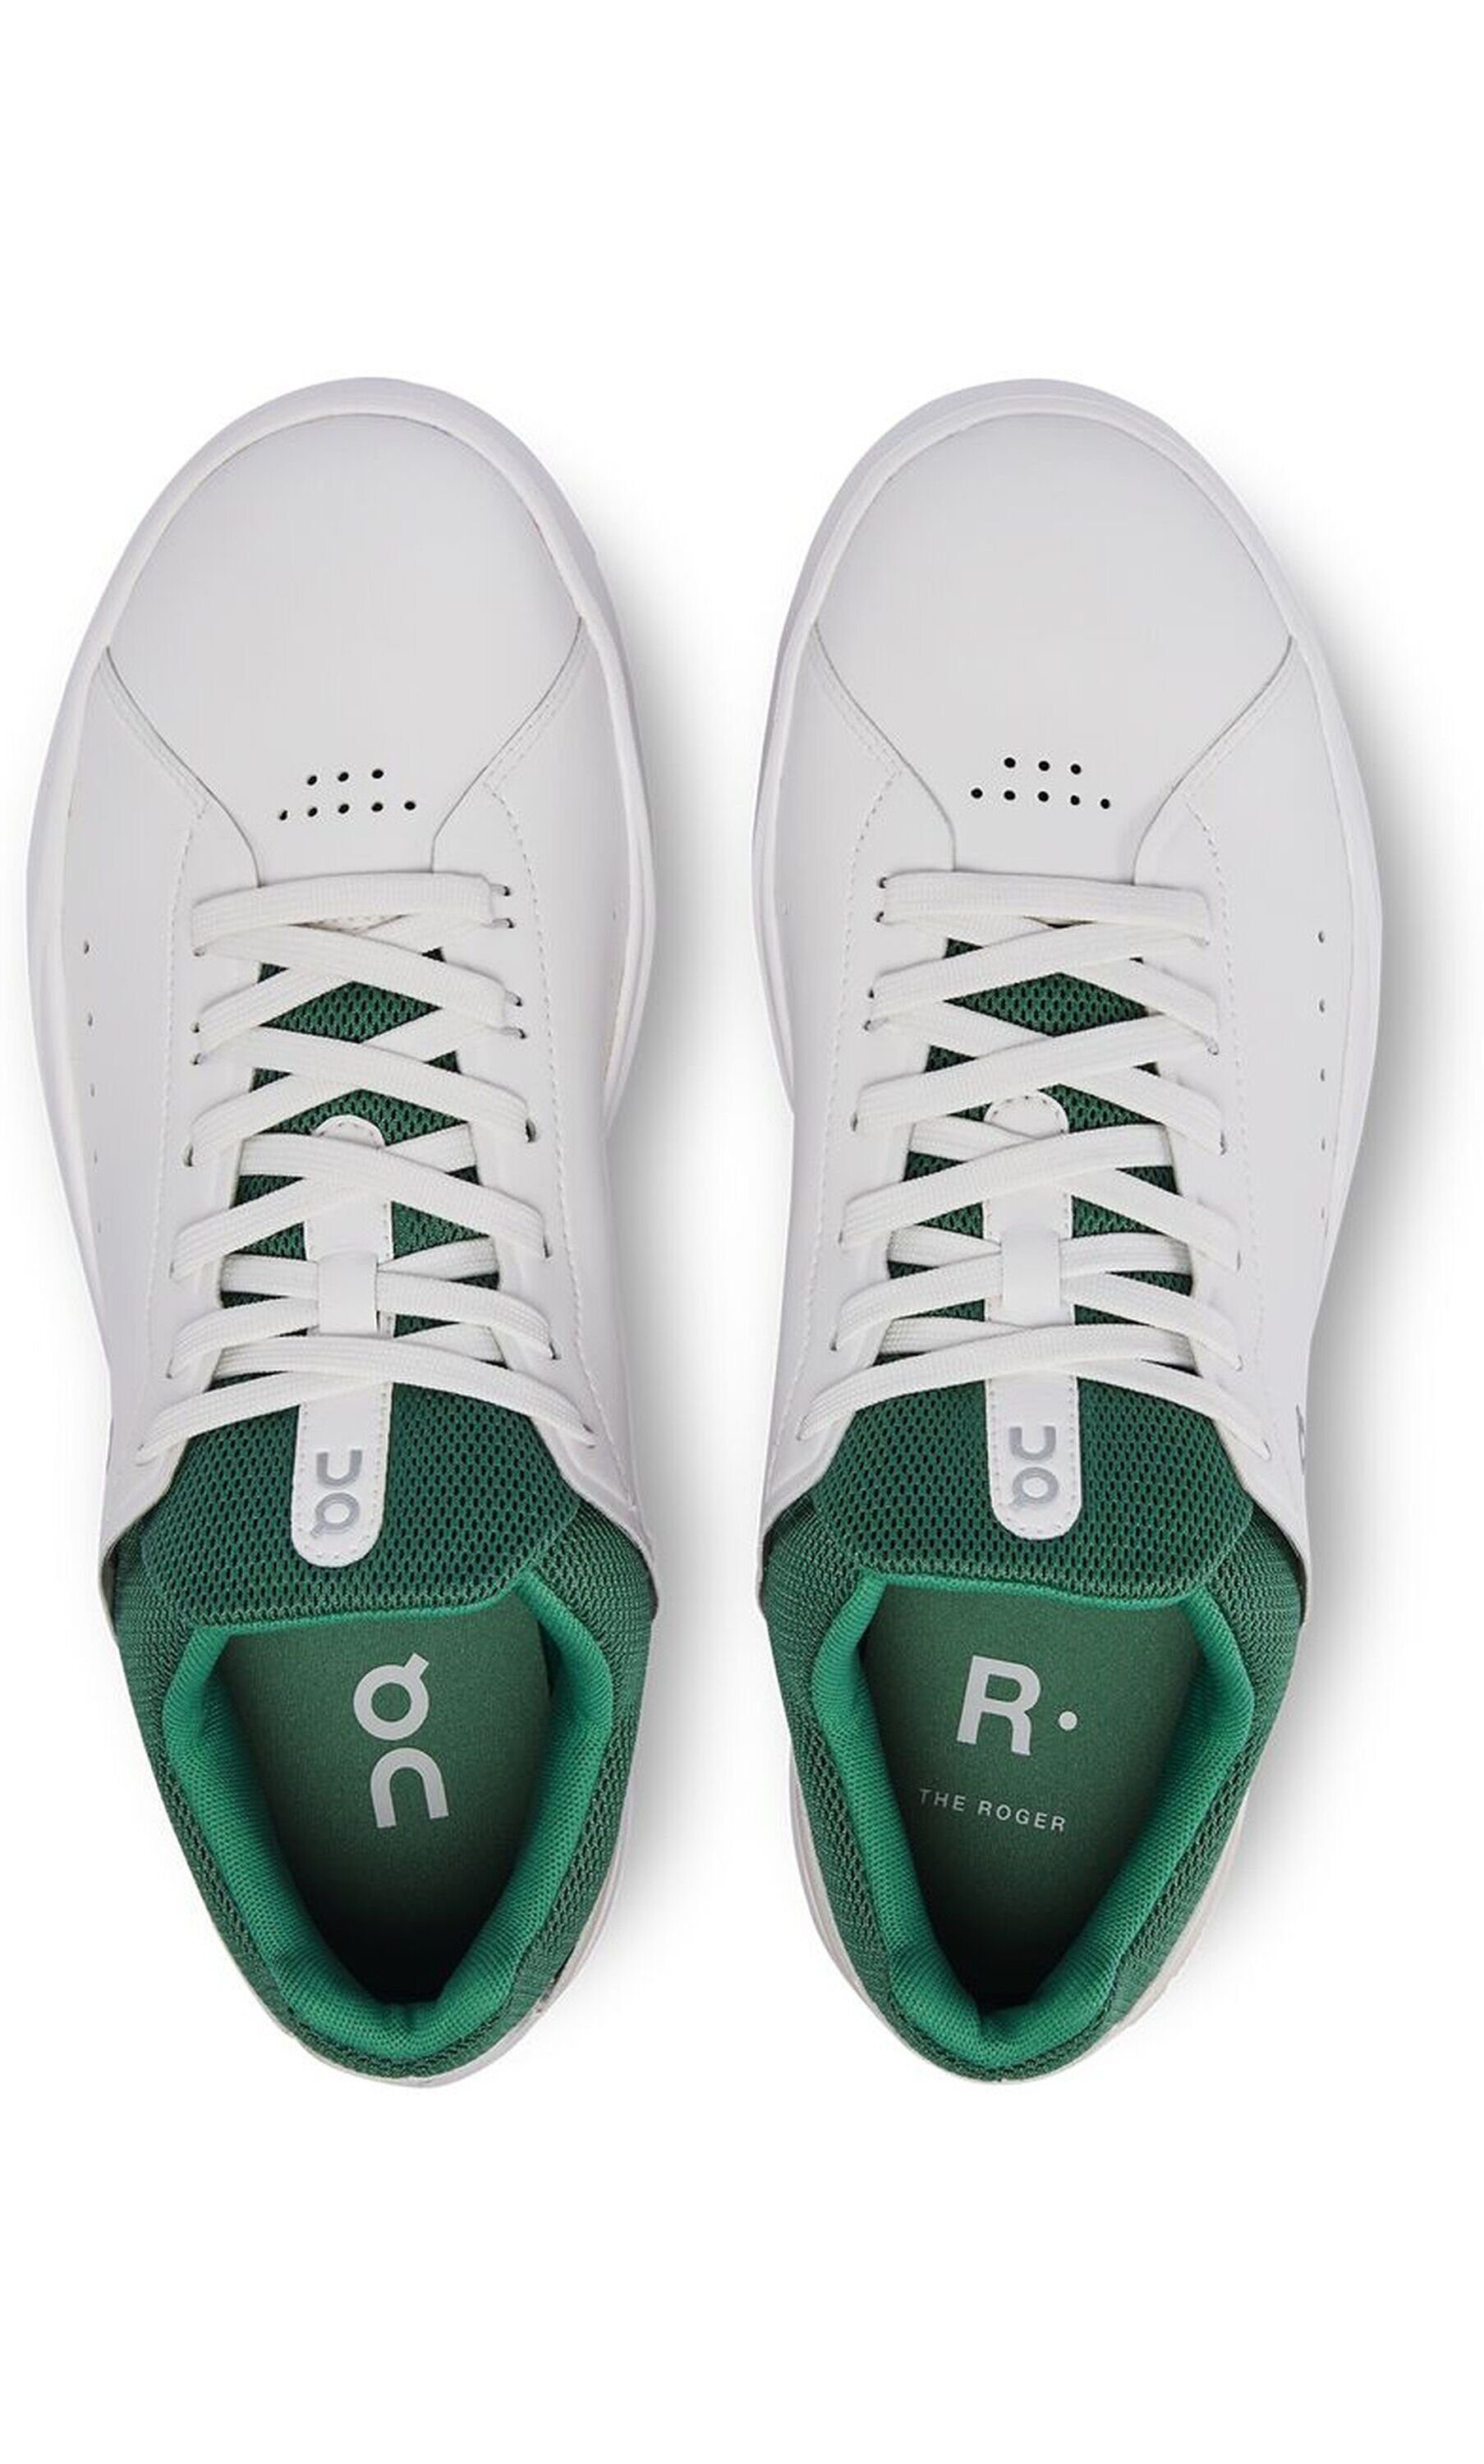 CloudTec-Außensohle THE Sneaker ON ROGER 98515 mit (2-tlg) Green / White RUNNING Advantage